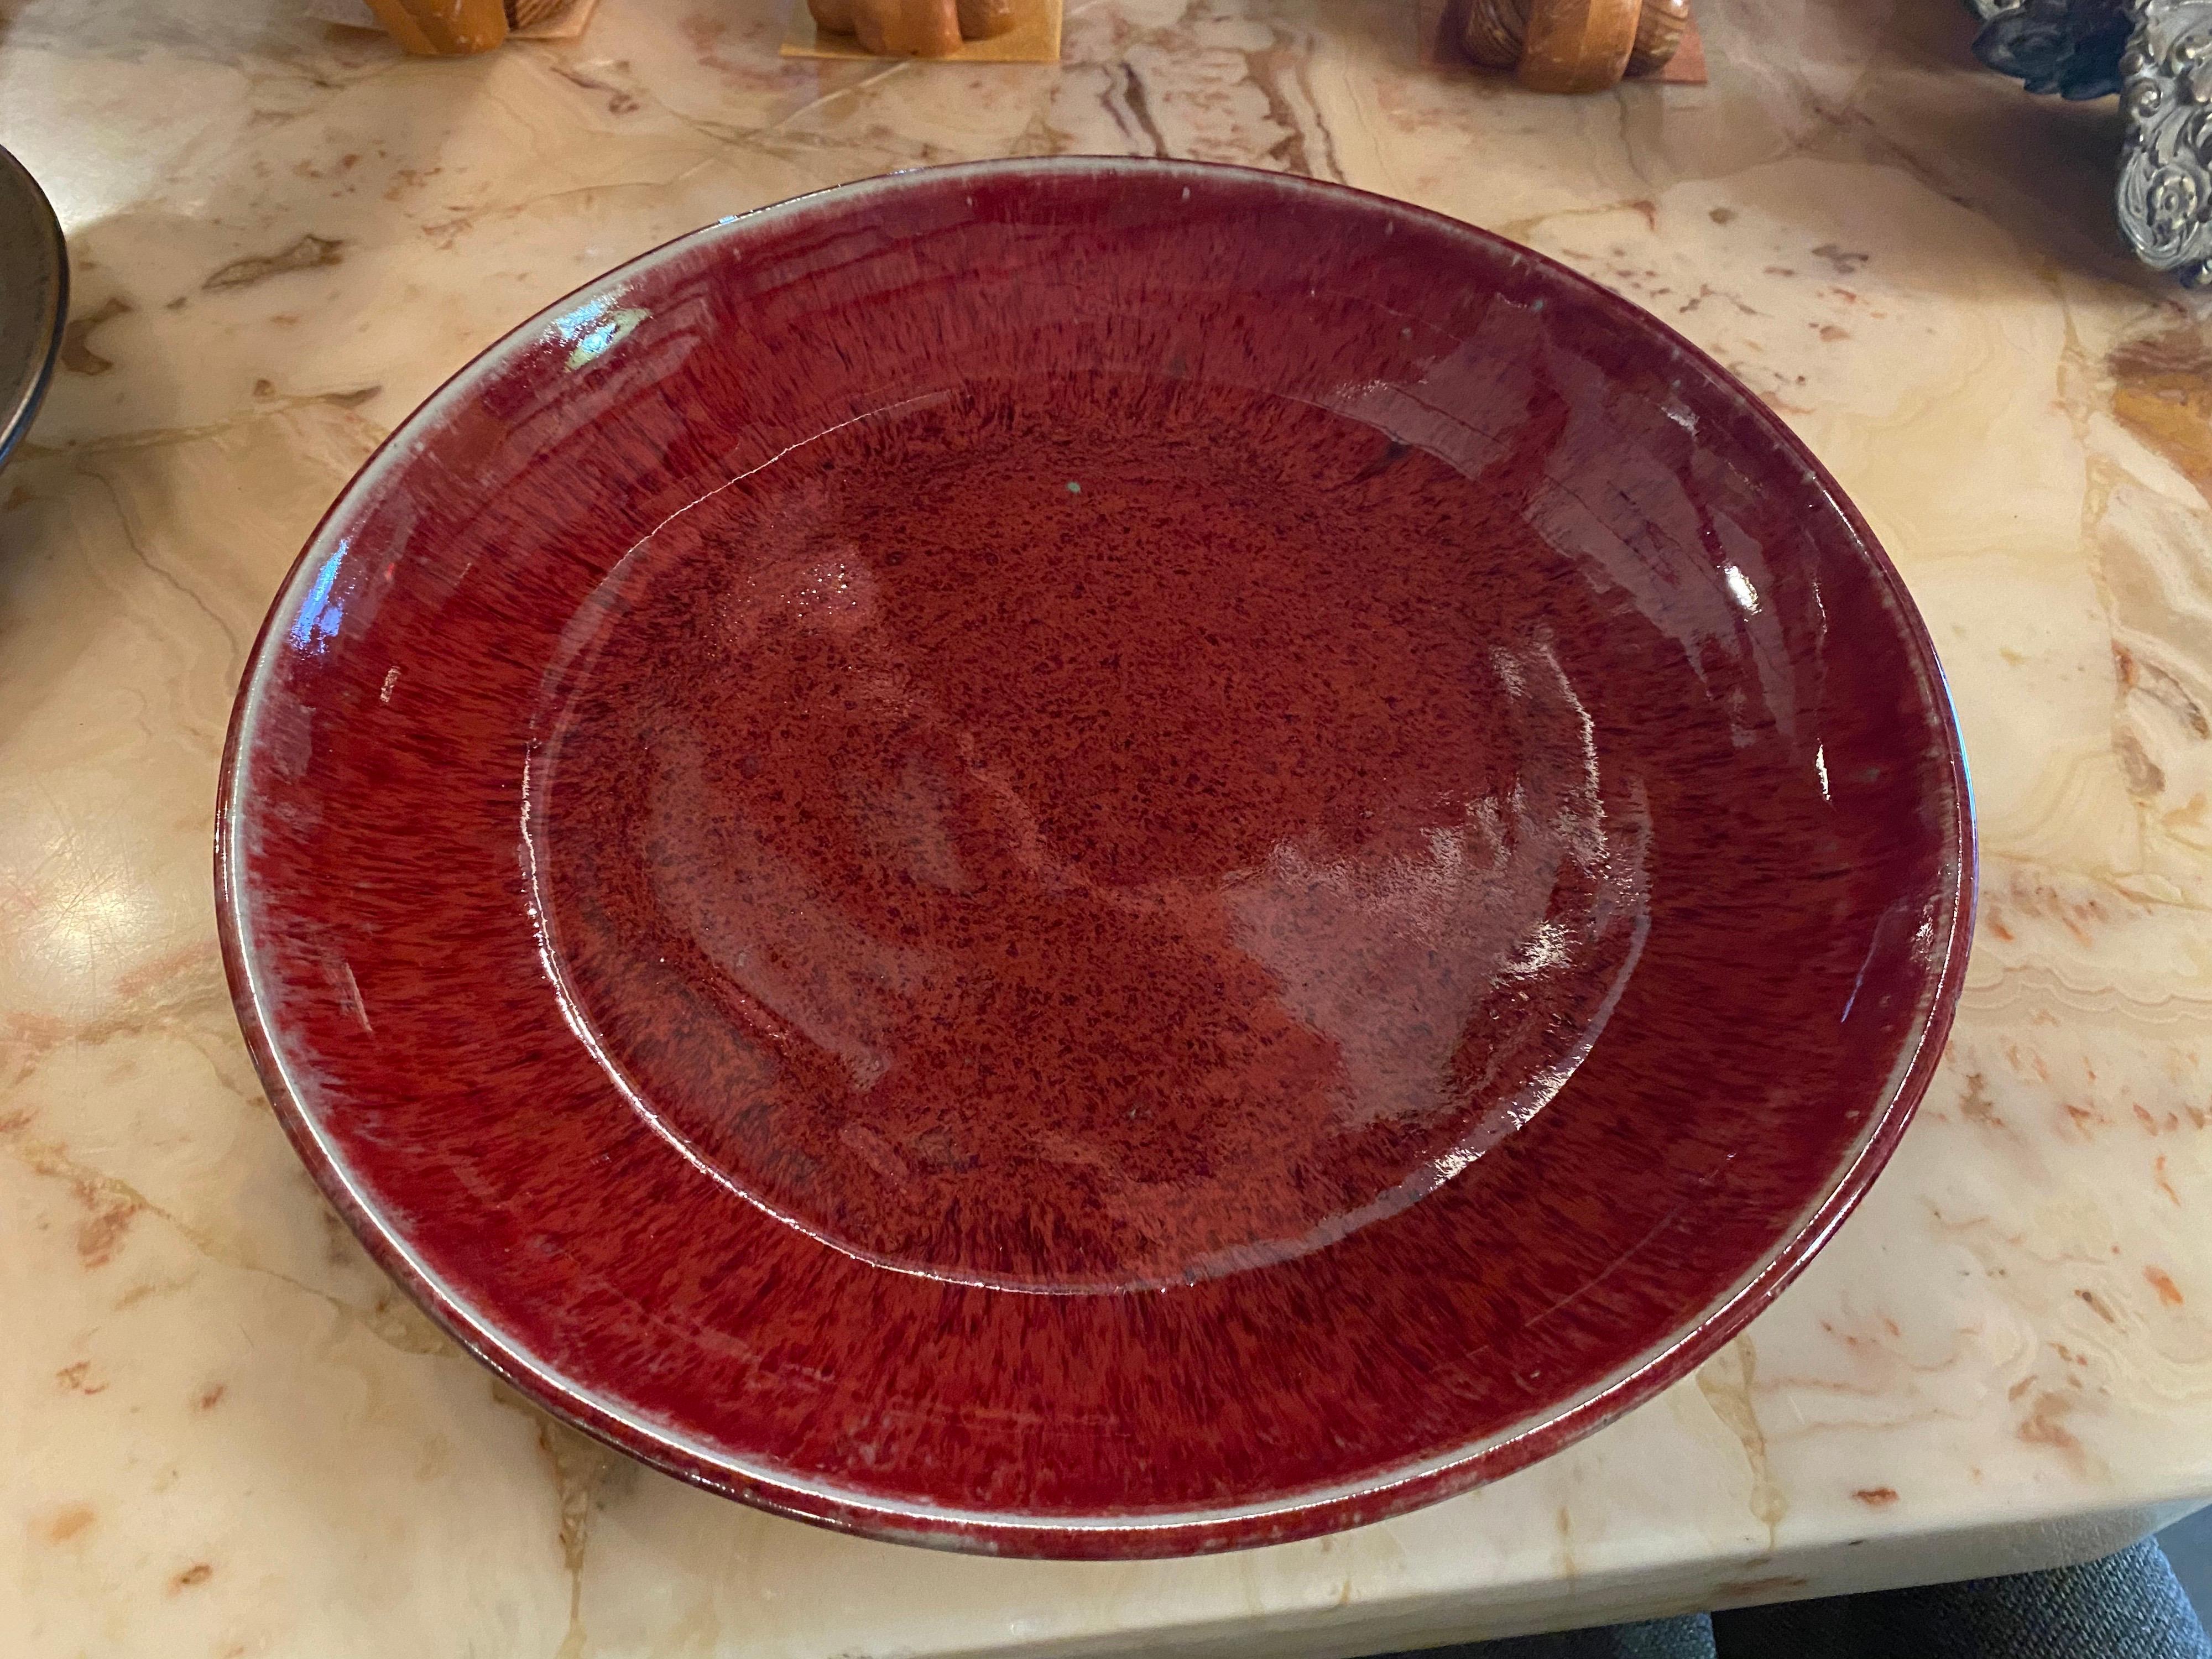 Stunning large mid-century ceramic decorative bowl by Texas Ceramist Harding Black made in 1951 features a beautiful glaze. This vintage ceramic piece is in great overall condition.